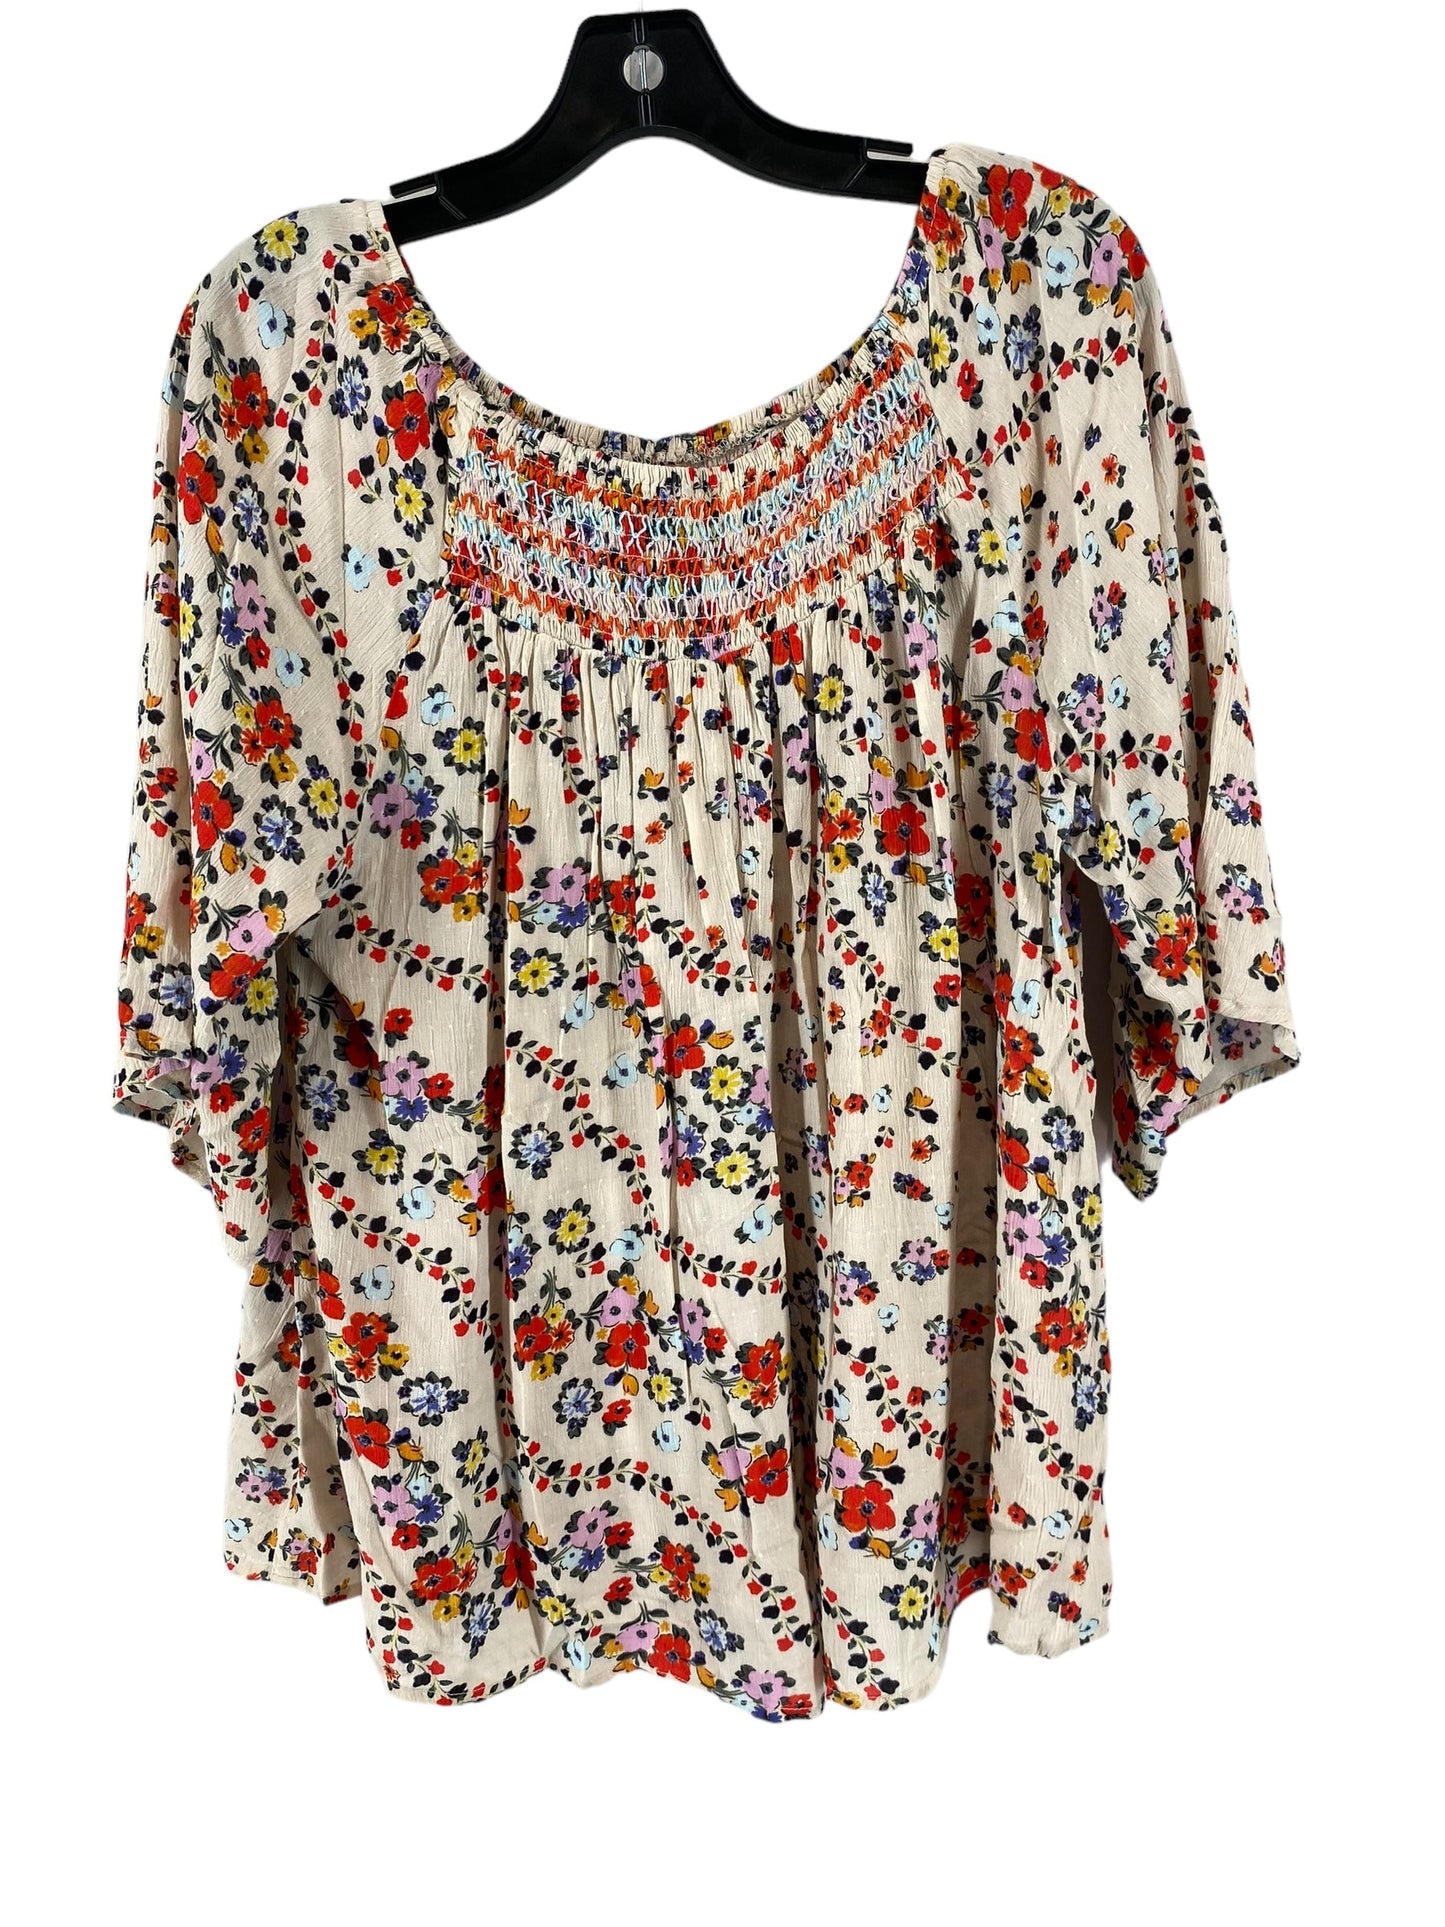 Floral Print Top 3/4 Sleeve Democracy, Size M